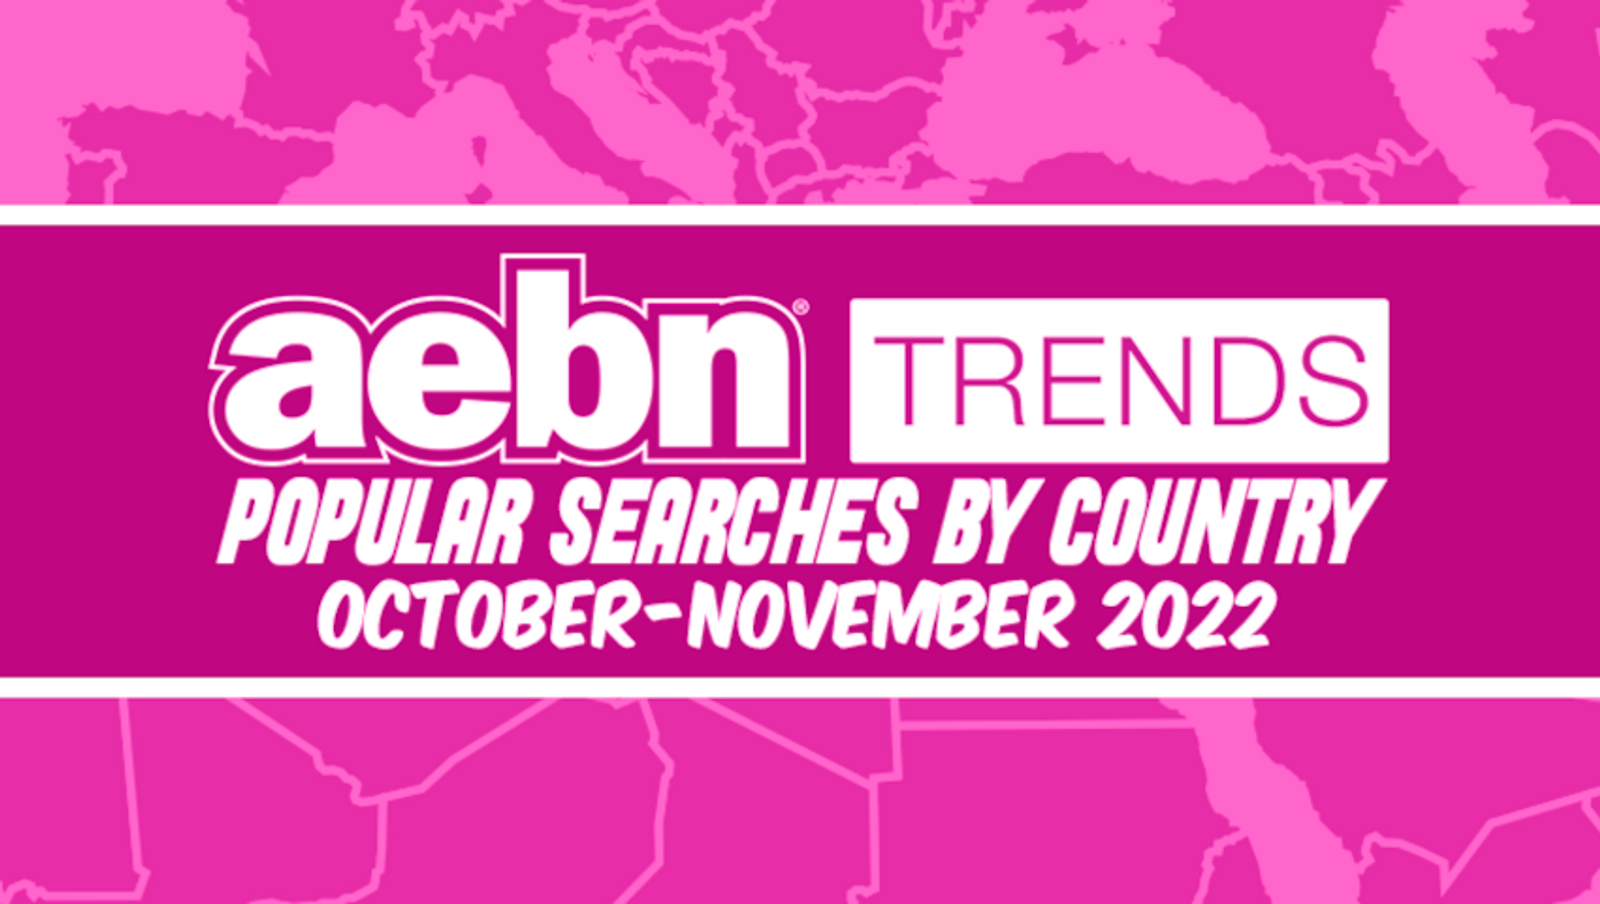 AEBN Publishes Popular Searches by Country for October, November